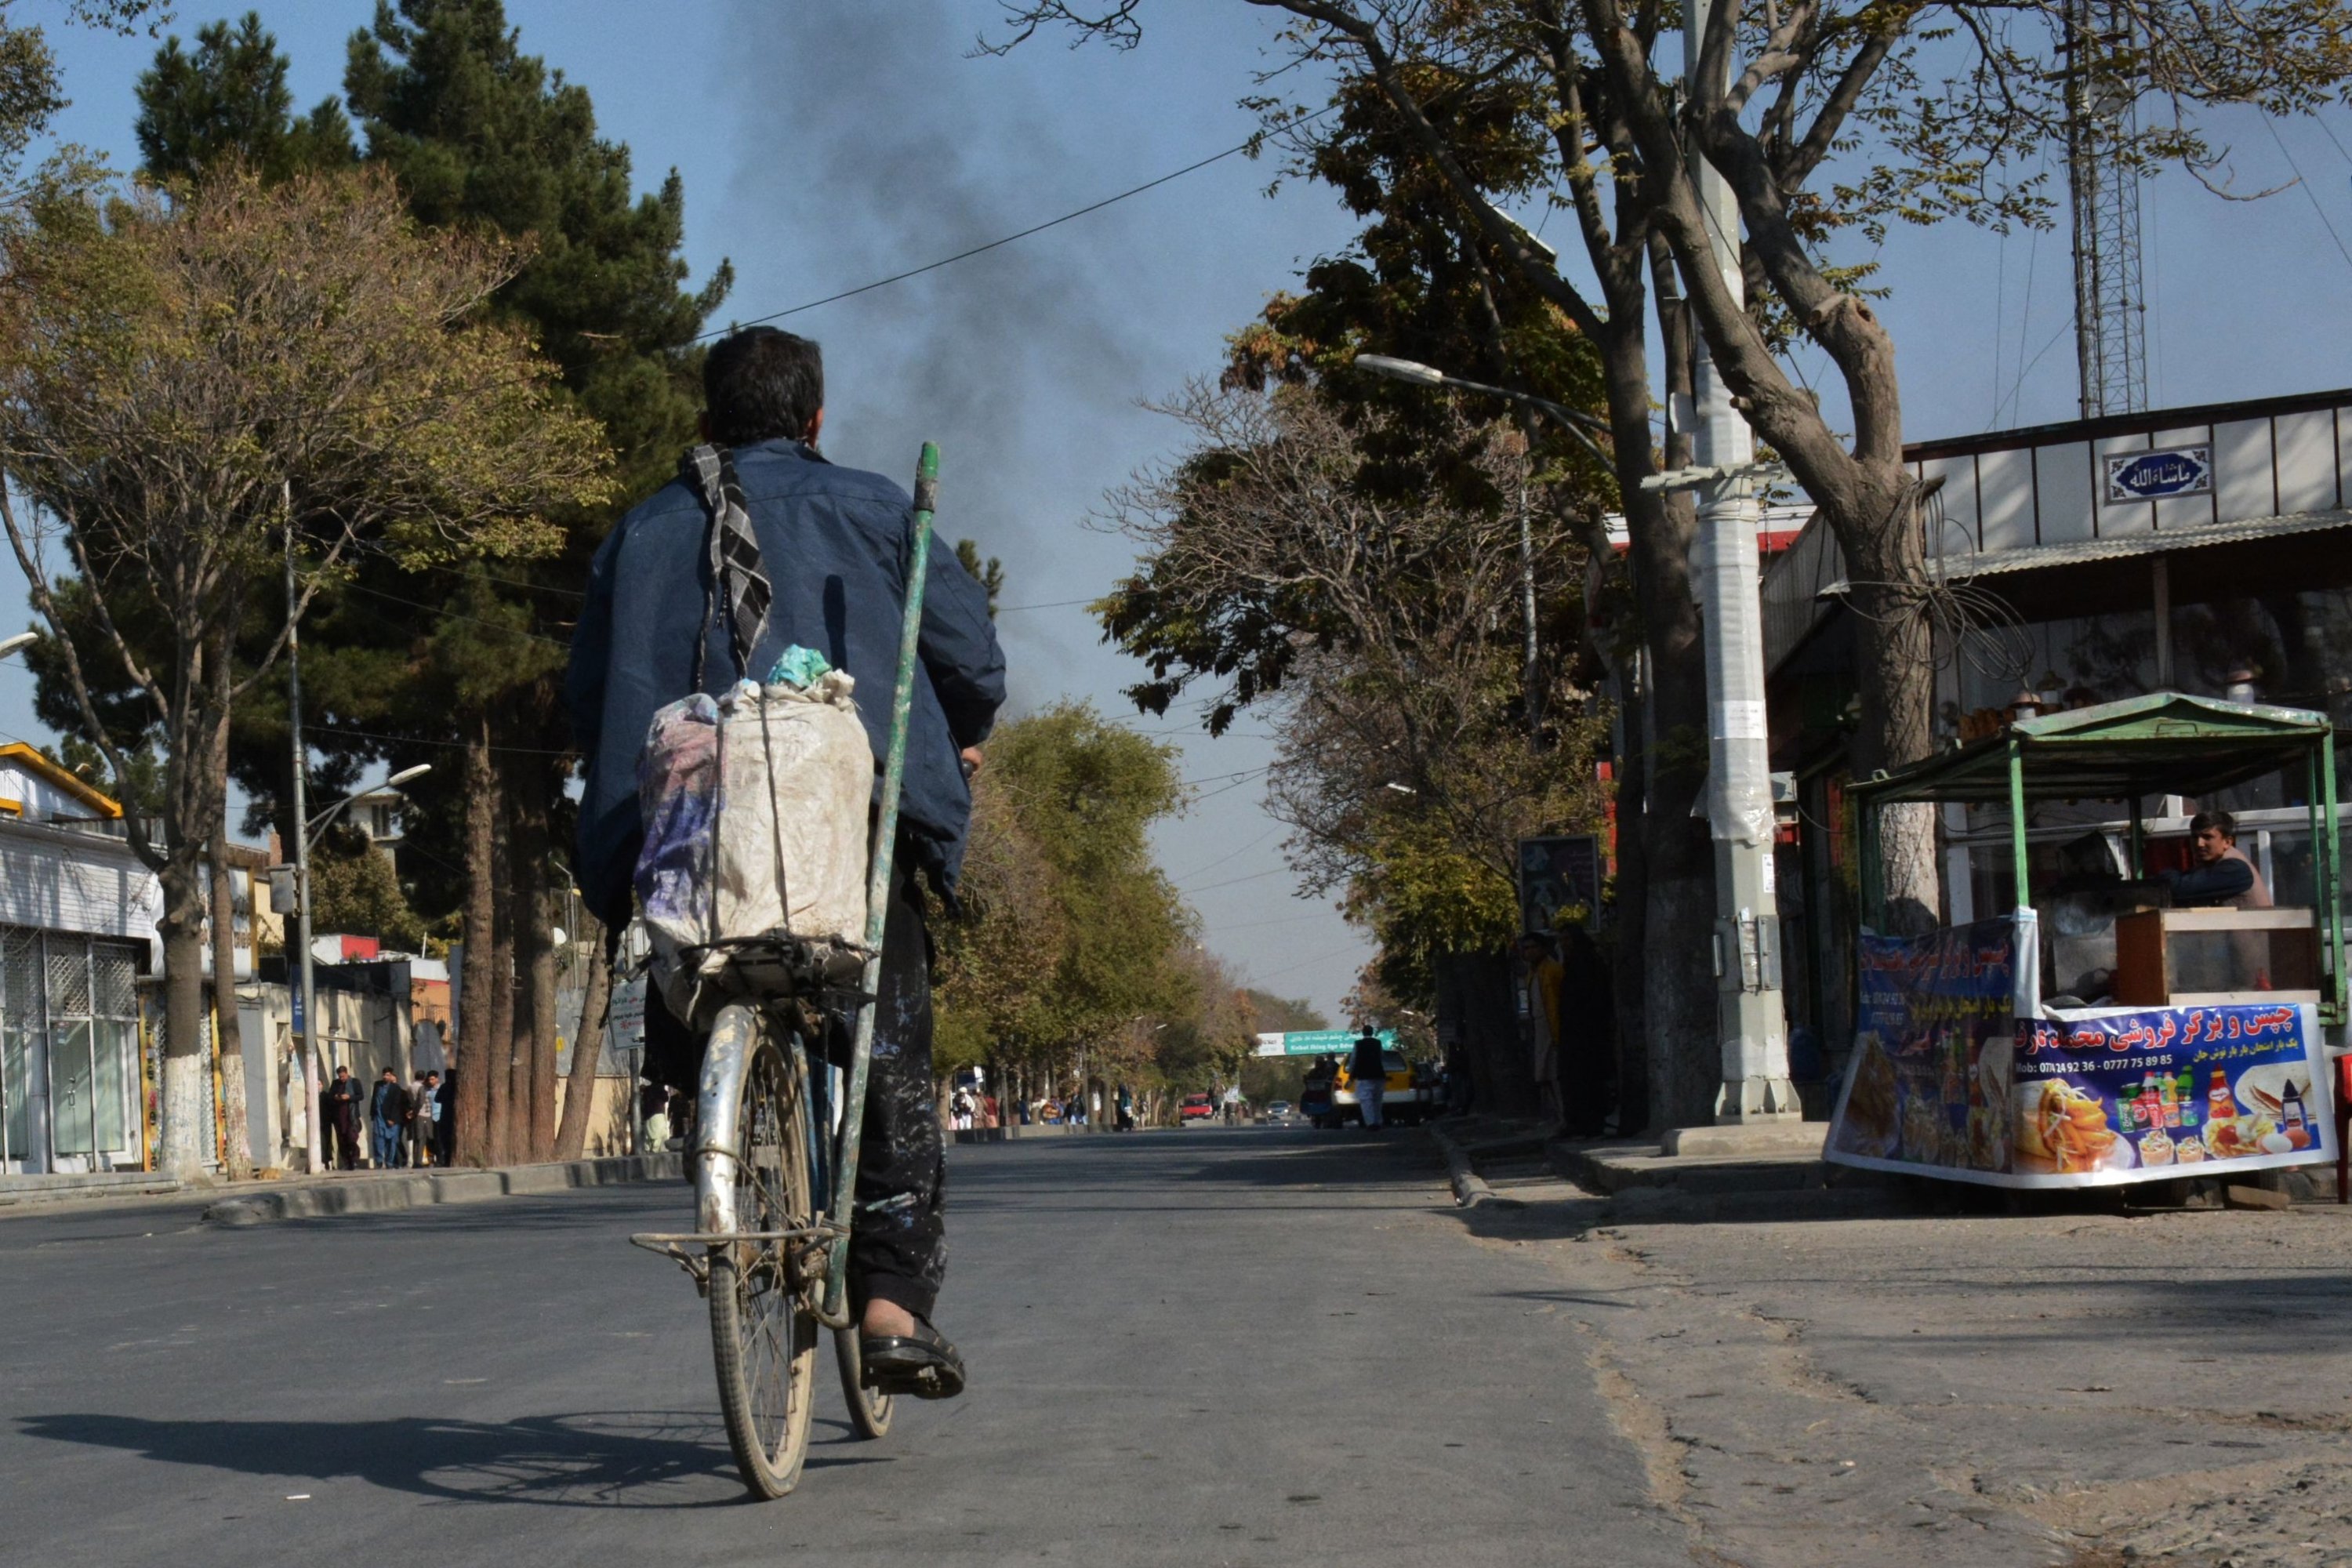 An Afghan man rides a bicycle along a road against the backdrop of smoke rising from the site of blasts in Kabul, Afghanistan, Nov. 2, 2021. (AFP Photo)